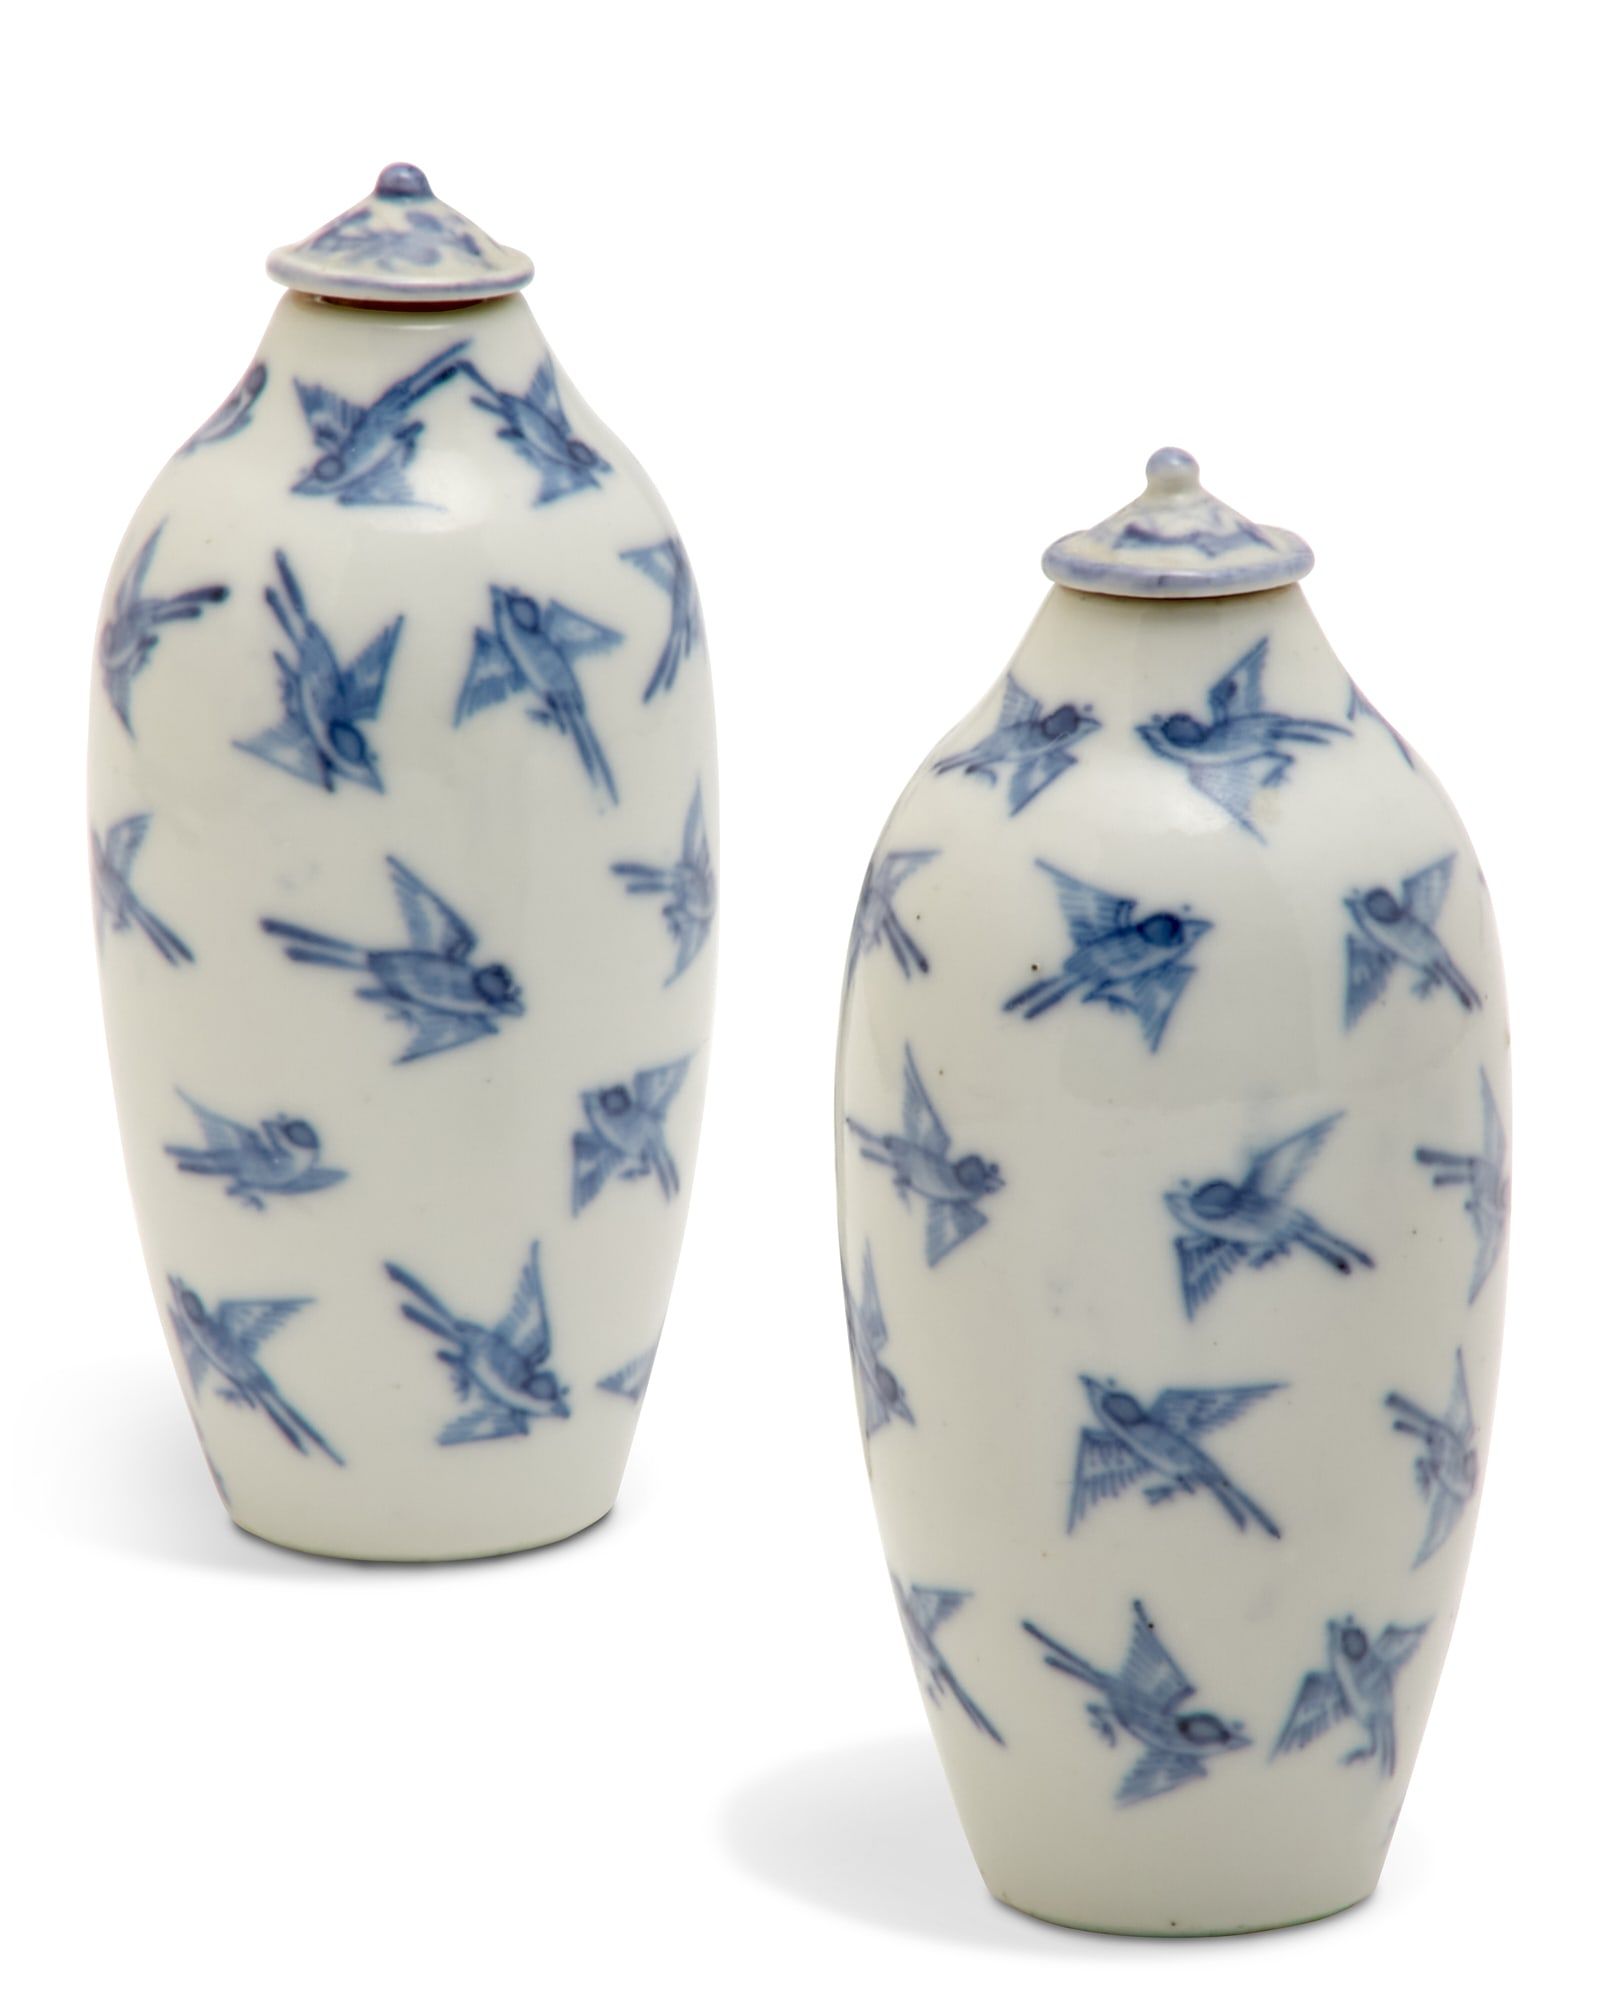 A PAIR OF CHINESE PORCELAIN SNUFF 2fb3b6d